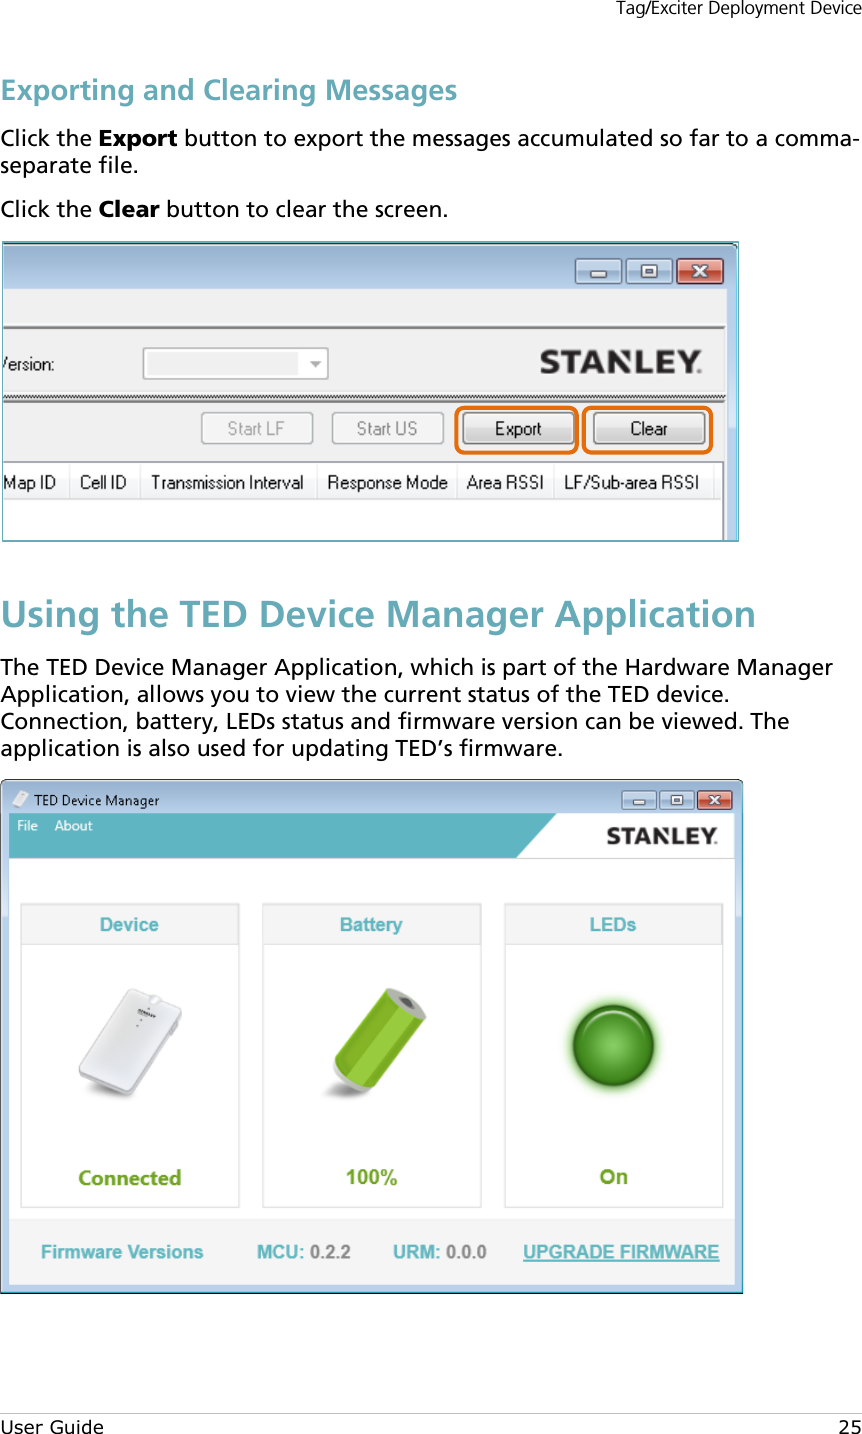 Tag/Exciter Deployment Device User Guide 25 Exporting and Clearing Messages Click the Export button to export the messages accumulated so far to a comma-separate file. Click the Clear button to clear the screen.  Using the TED Device Manager Application The TED Device Manager Application, which is part of the Hardware Manager Application, allows you to view the current status of the TED device. Connection, battery, LEDs status and firmware version can be viewed. The application is also used for updating TED’s firmware.      